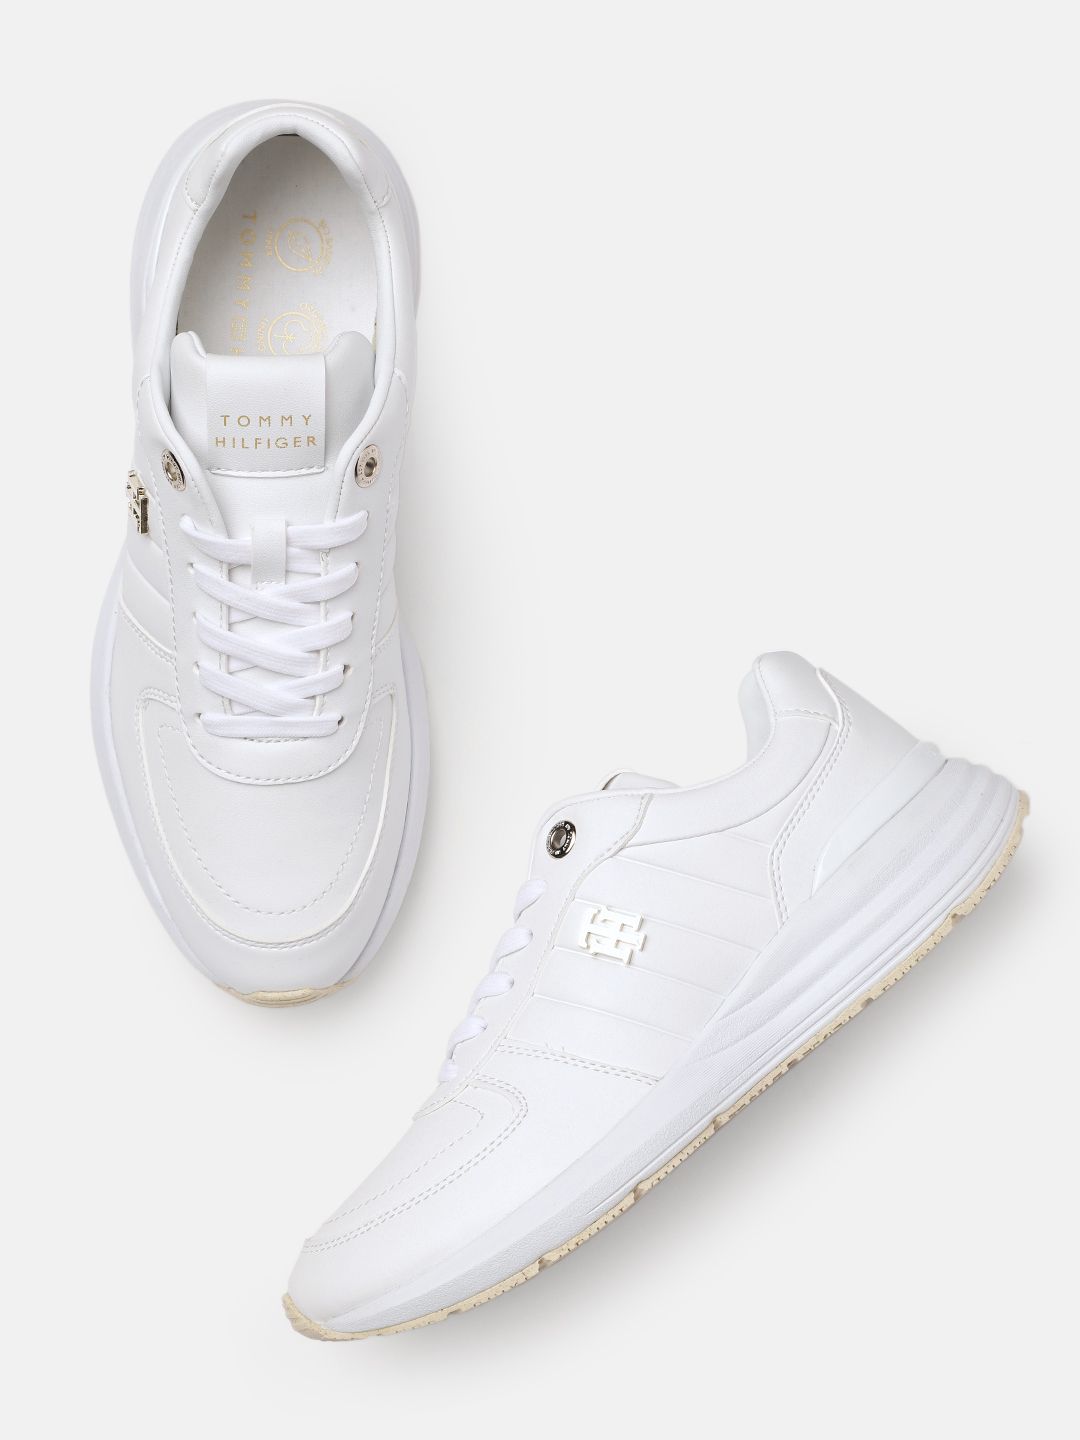 Tommy Hilfiger Women White Solid Sneakers Price in India